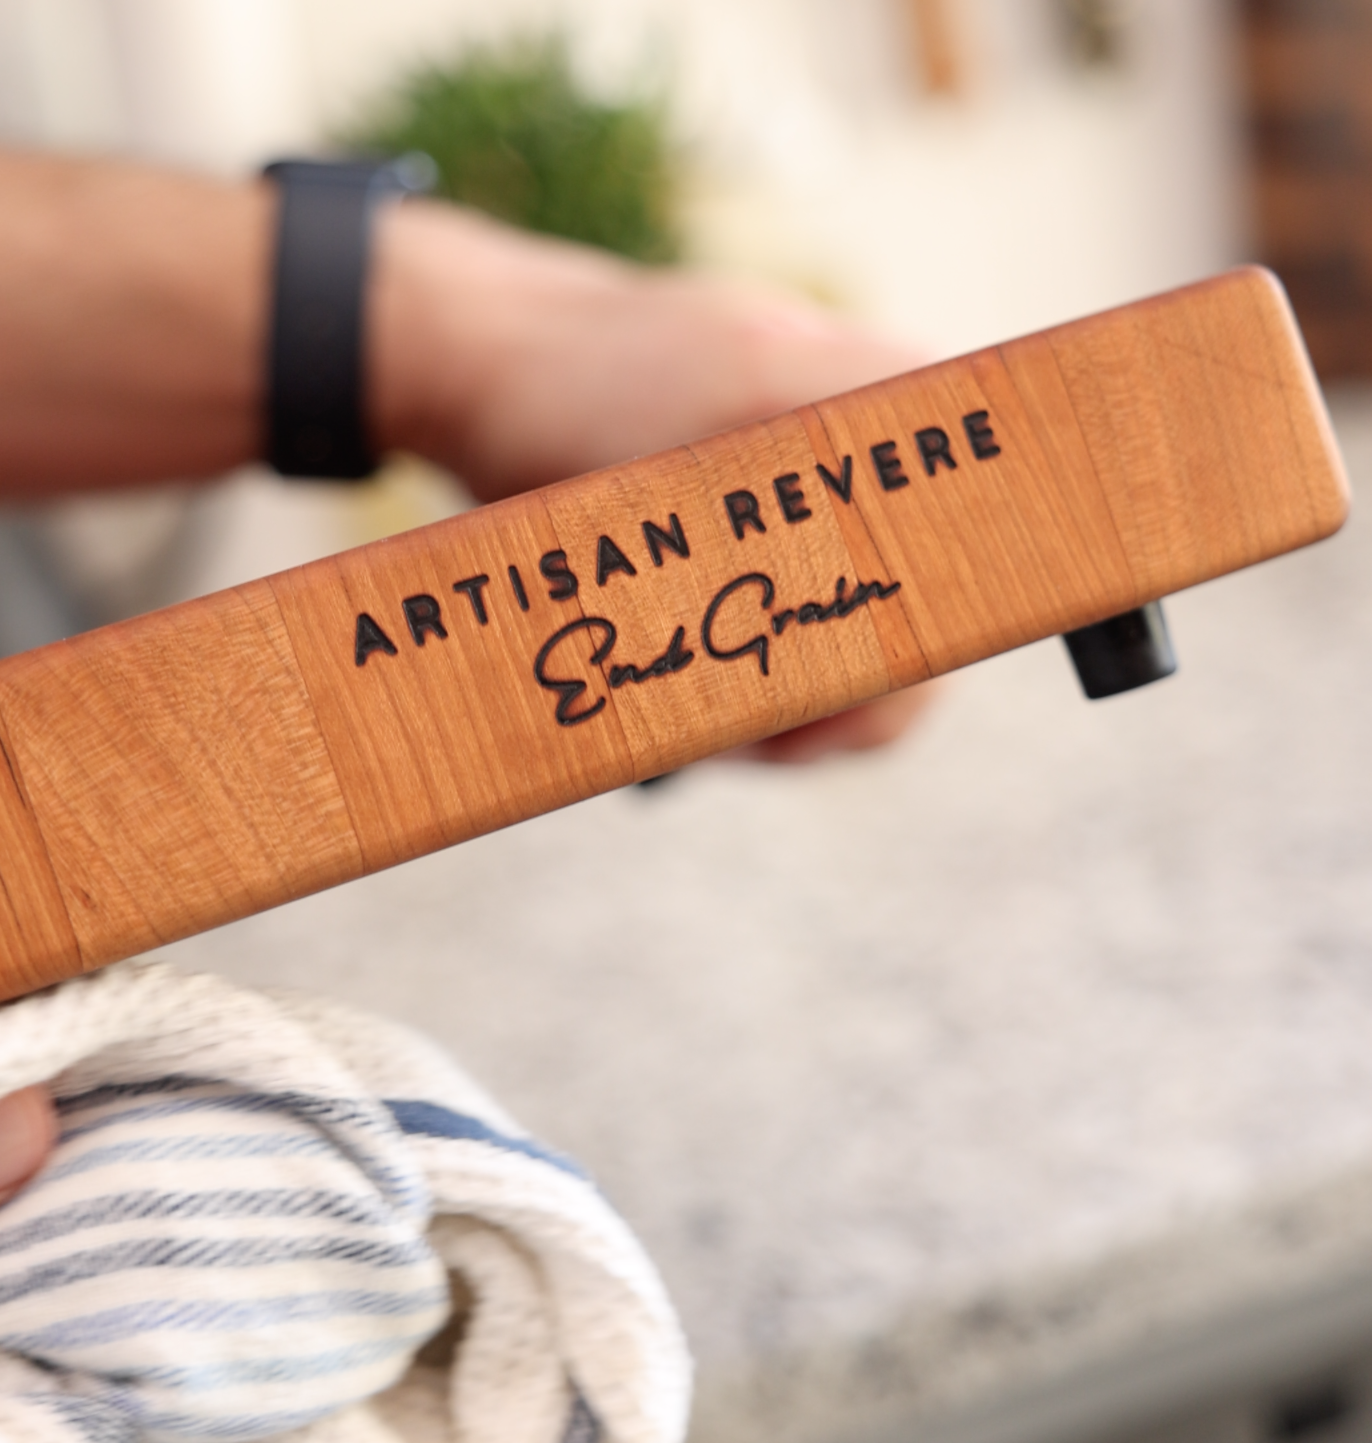 The Definitive Guide To Cutting Boards – Artisan Revere